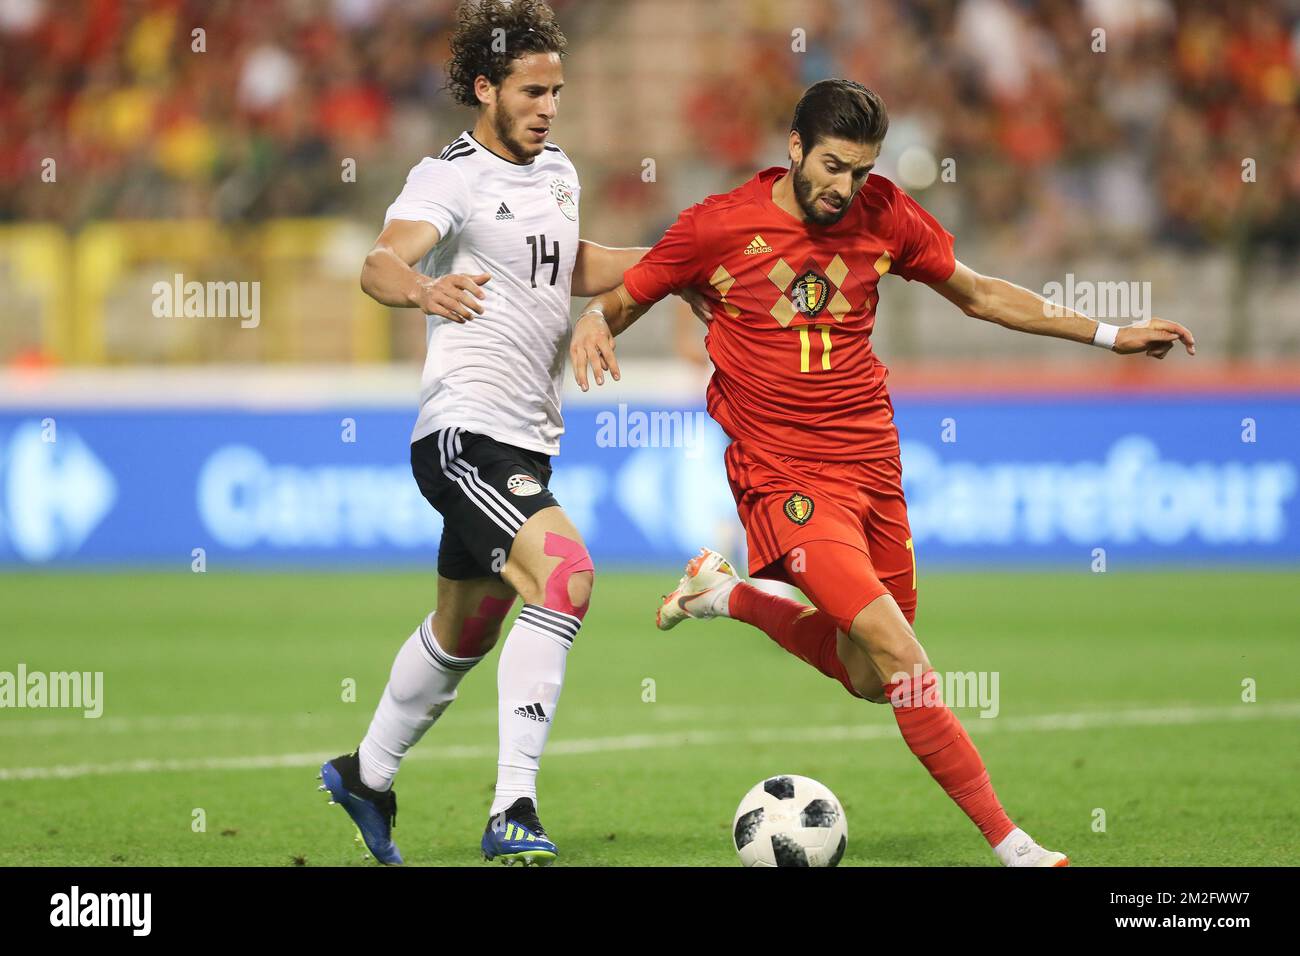 Egypt's Ramadan Sobhi and Belgium's Yannick Carrasco fight for the ball during a friendly game between Belgium national team, The Red Devils and Egyptian national soccer team, Wednesday 06 June 2018, in Brussels. Both teams prepare the upcoming FIFA World Cup 2018 in Russia. BELGA PHOTO BRUNO FAHY Stock Photo